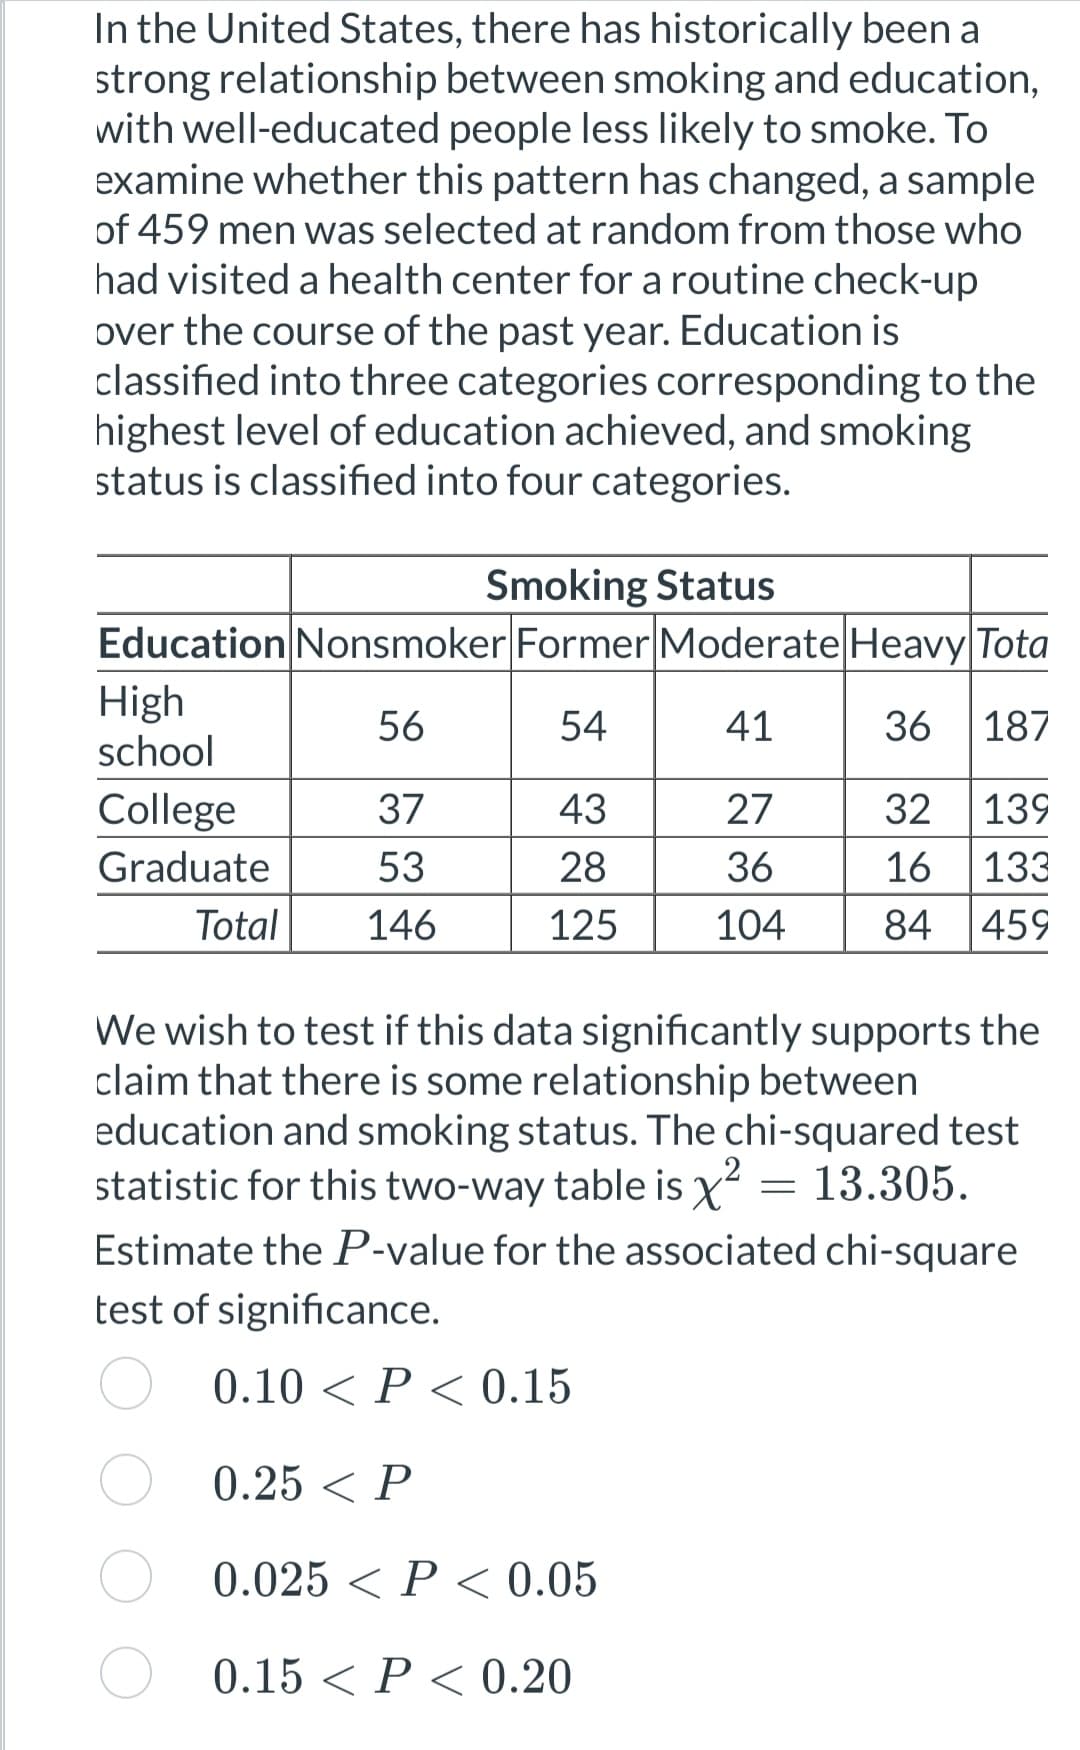 In the United States, there has historically been a
strong relationship between smoking and education,
with well-educated people less likely to smoke. To
examine whether this pattern has changed, a sample
of 459 men was selected at random from those who
had visited a health center for a routine check-up
over the course of the past year. Education is
classified into three categories corresponding to the
highest level of education achieved, and smoking
status is classified into four categories.
Smoking Status
Education Nonsmoker Former Moderate Heavy Tota
56
54
41
36
187
37
43
27
32
139
53
28
36
16 133
146
125
104
84 459
High
school
College
Graduate
Total
We wish to test if this data significantly supports the
claim that there is some relationship between
education and smoking status. The chi-squared test
statistic for this two-way table is x² = 13.305.
Estimate the P-value for the associated chi-square
test of significance.
0.10 < P < 0.15
0.25 < P
0.025 < P < 0.05
0.15 < P < 0.20